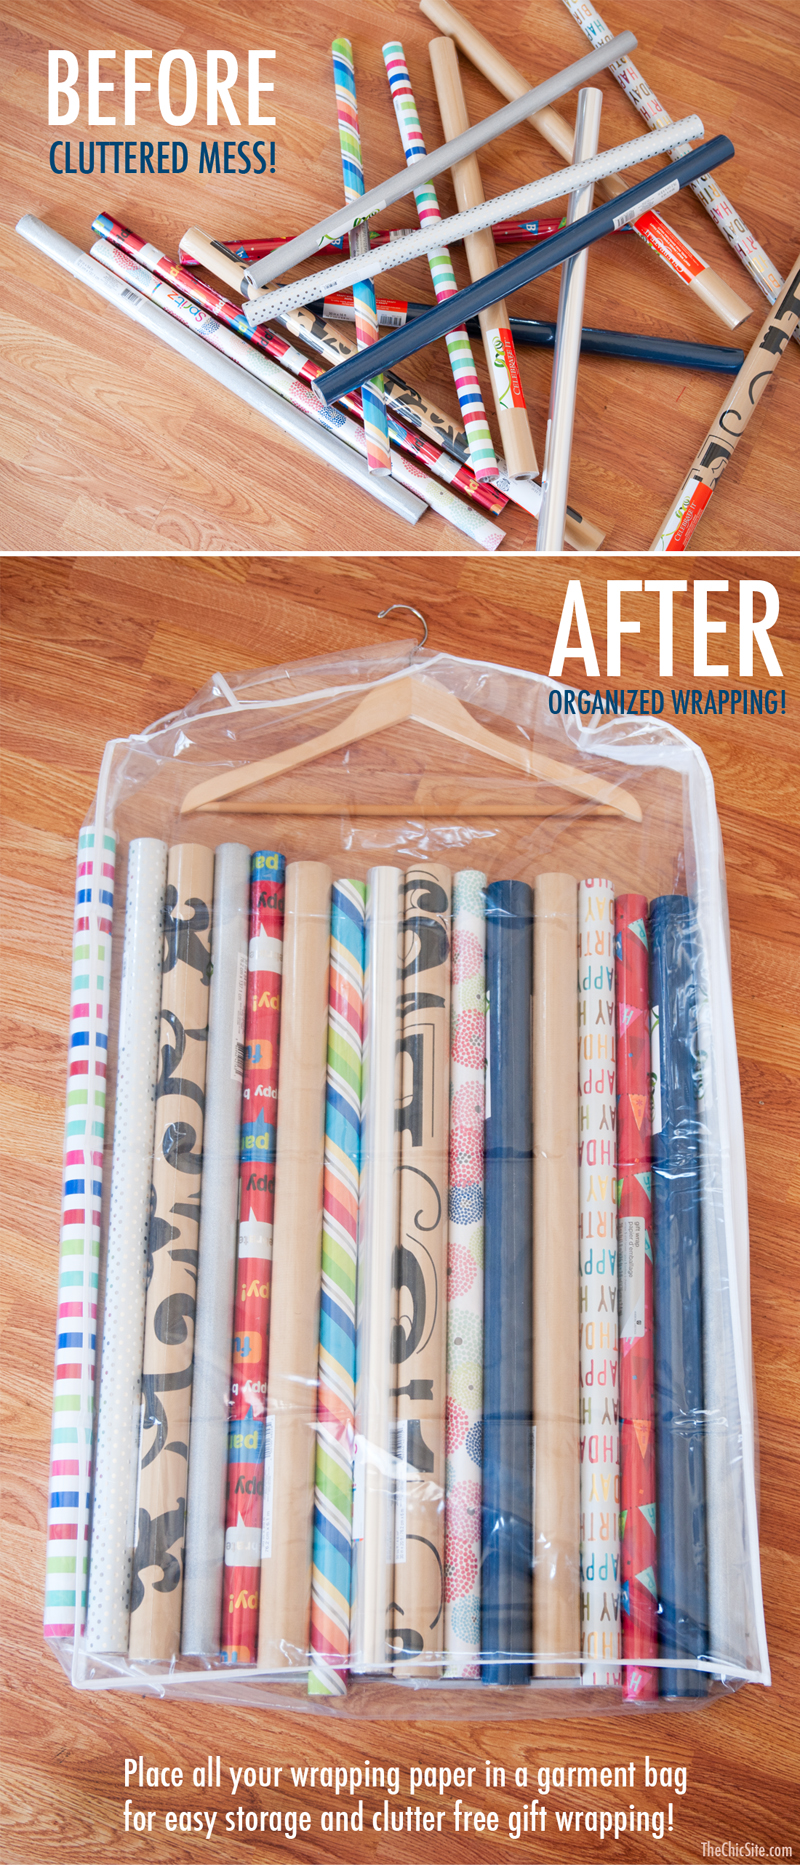 Storing rolls of gift wrapping paper in a clear garment bag is a smart holiday storage hack.